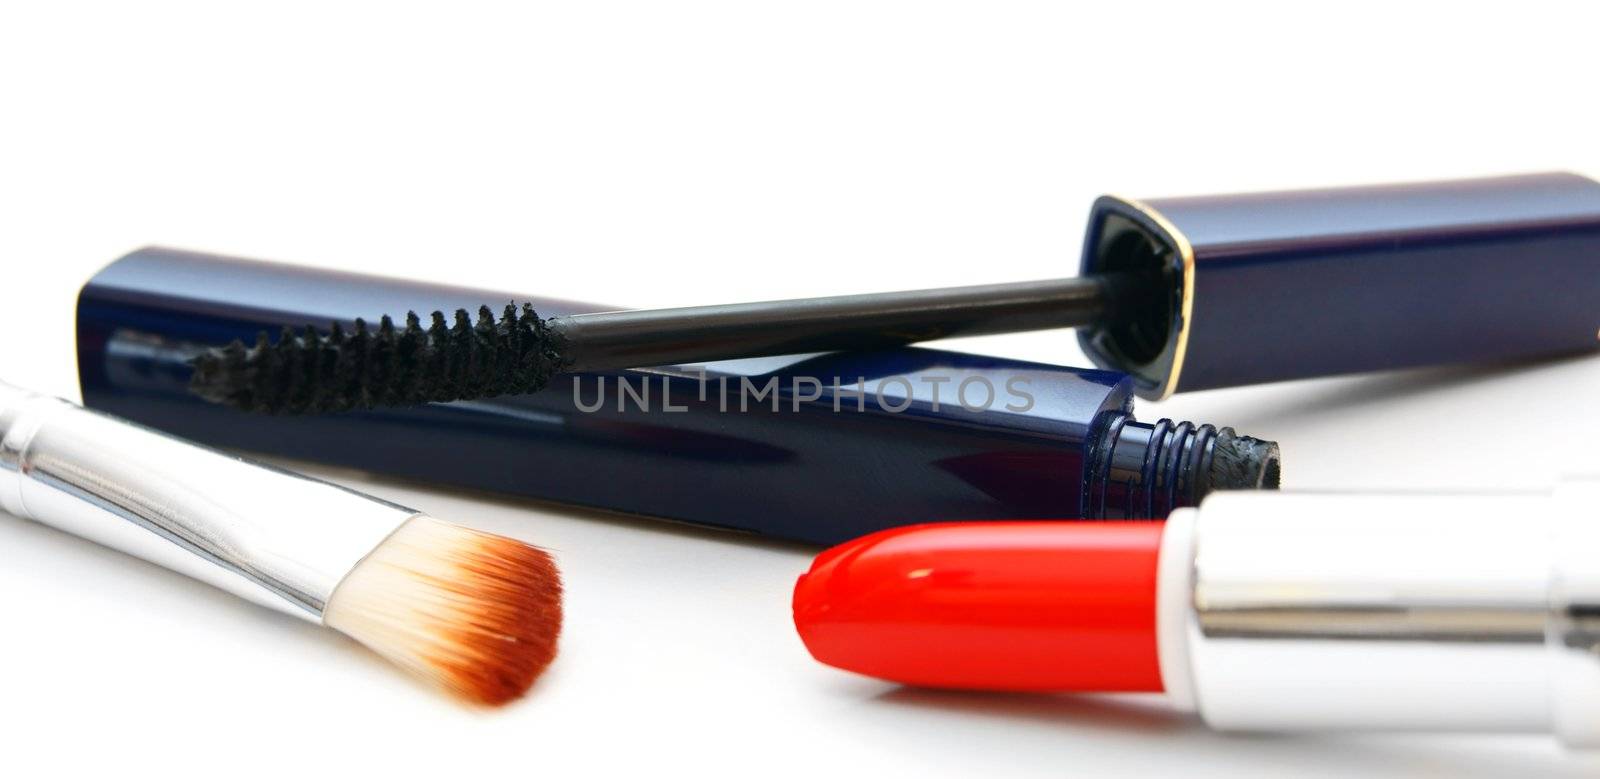 Cosmetics. On a white background.